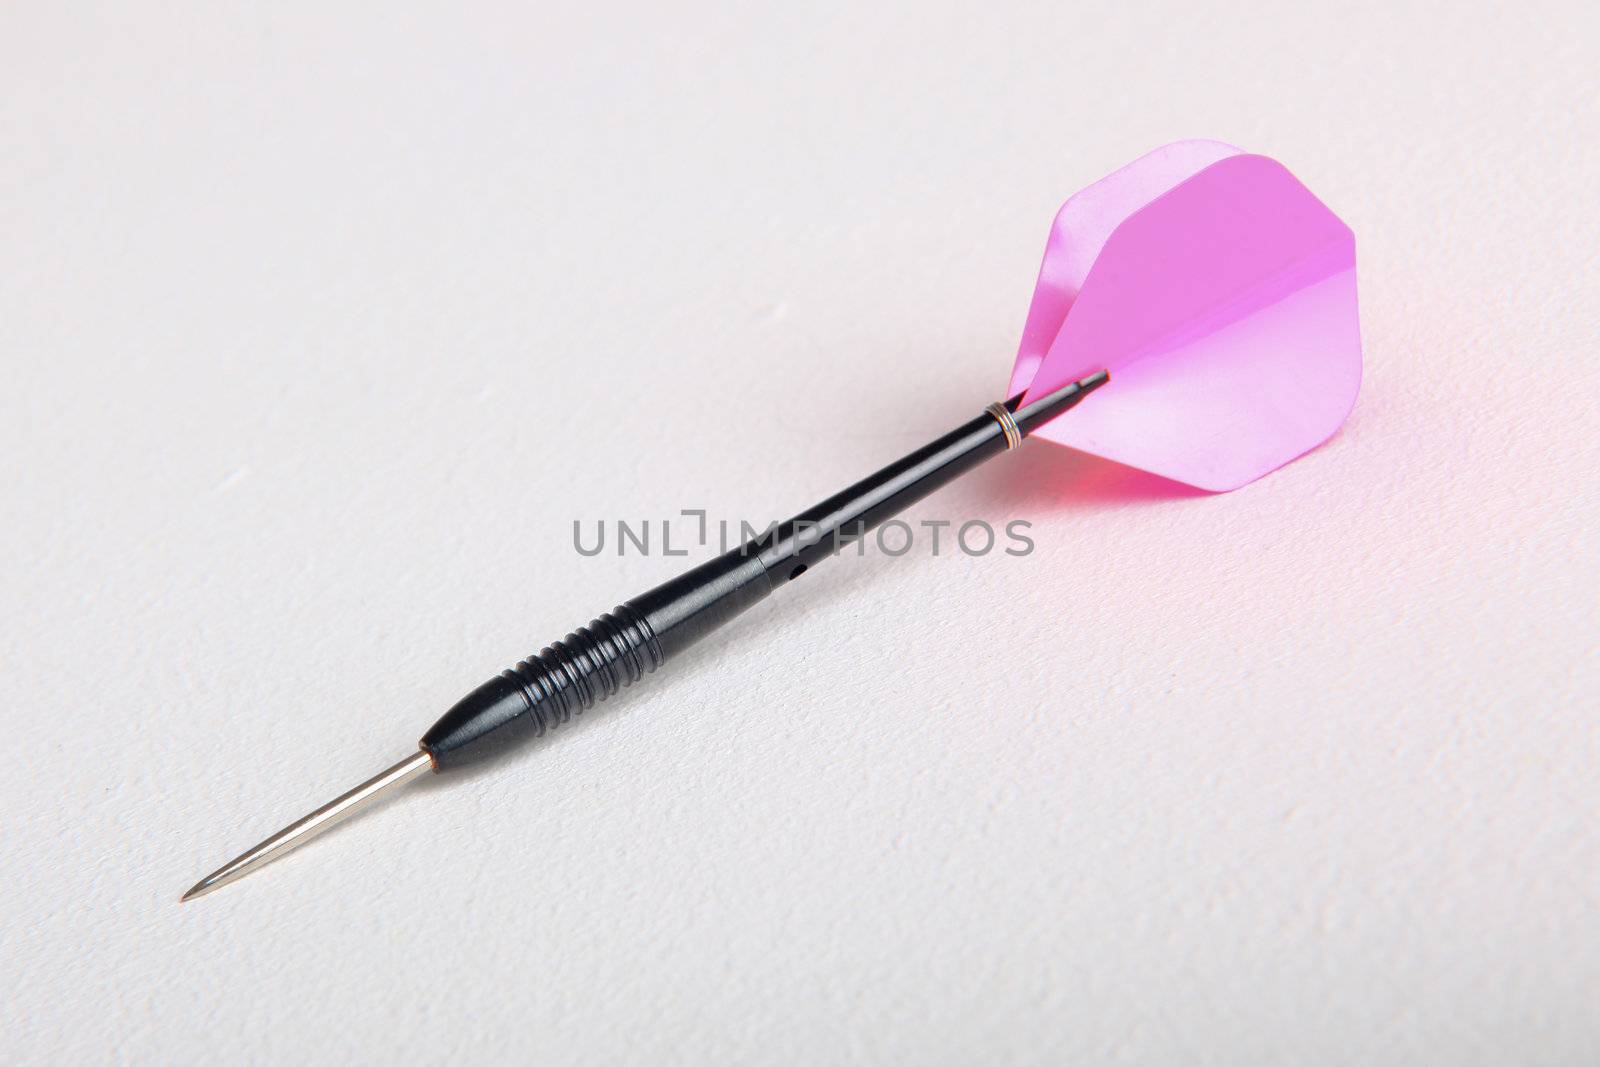 Isolated Image Of A Black Darts Arrow  by nfx702